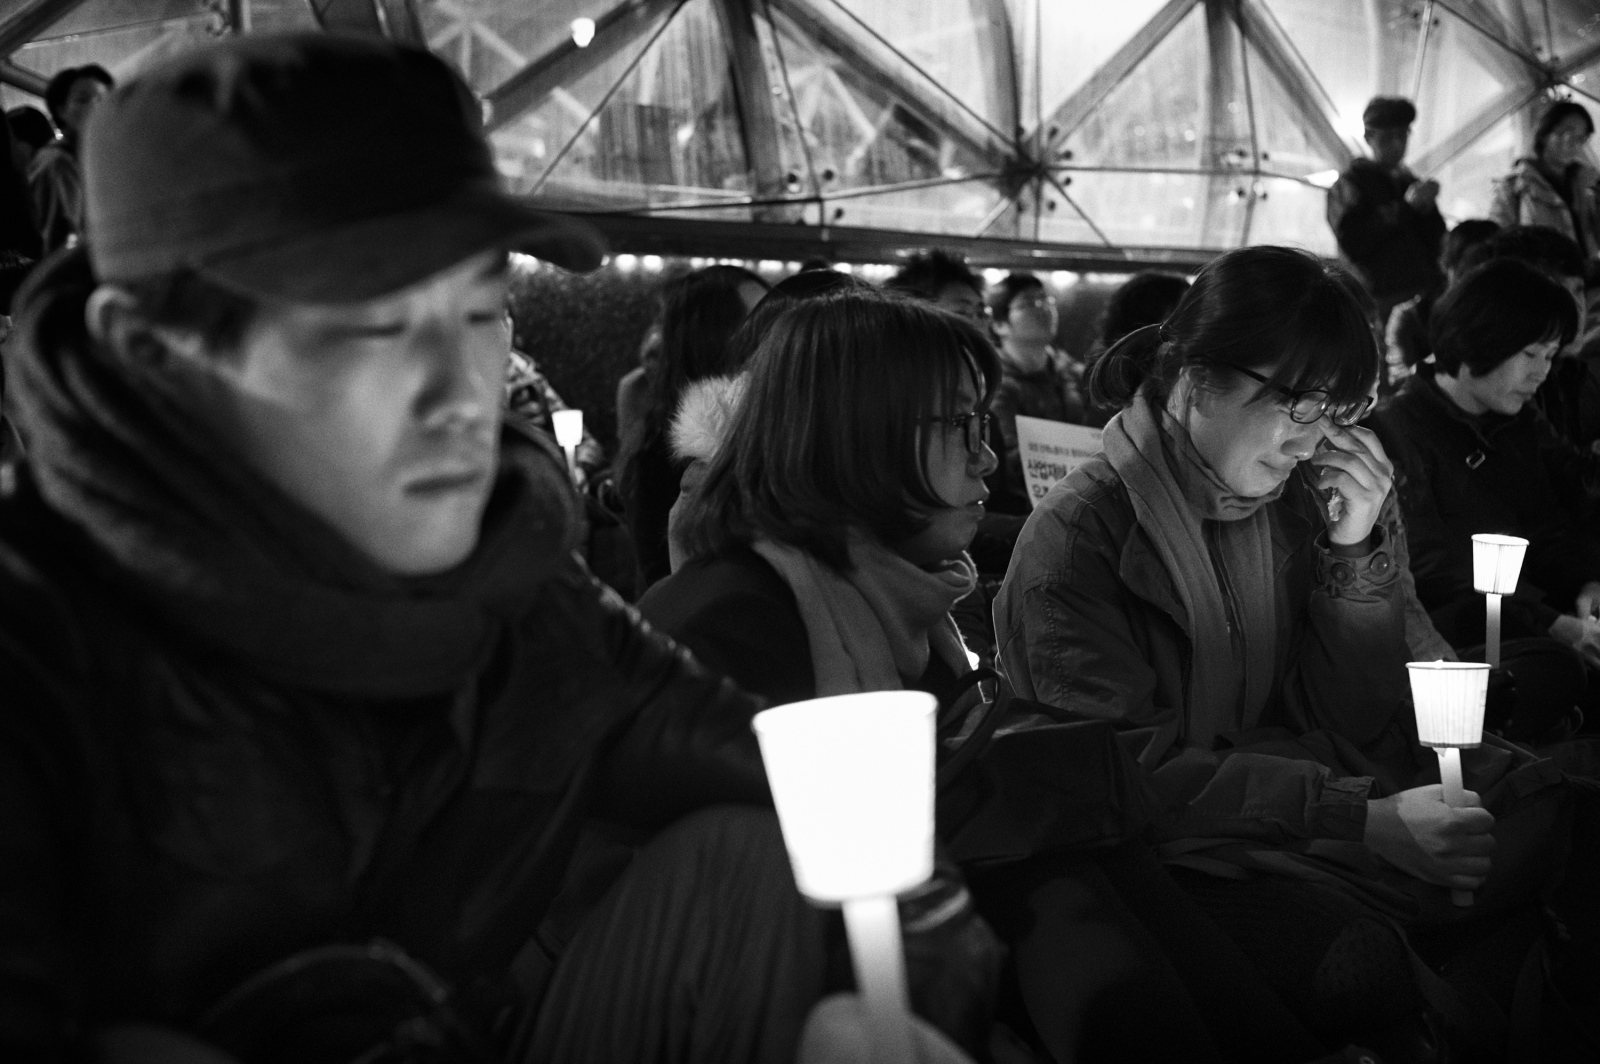  Victims&#39; families and ..., South Korea on Mar. 6, 2013. 